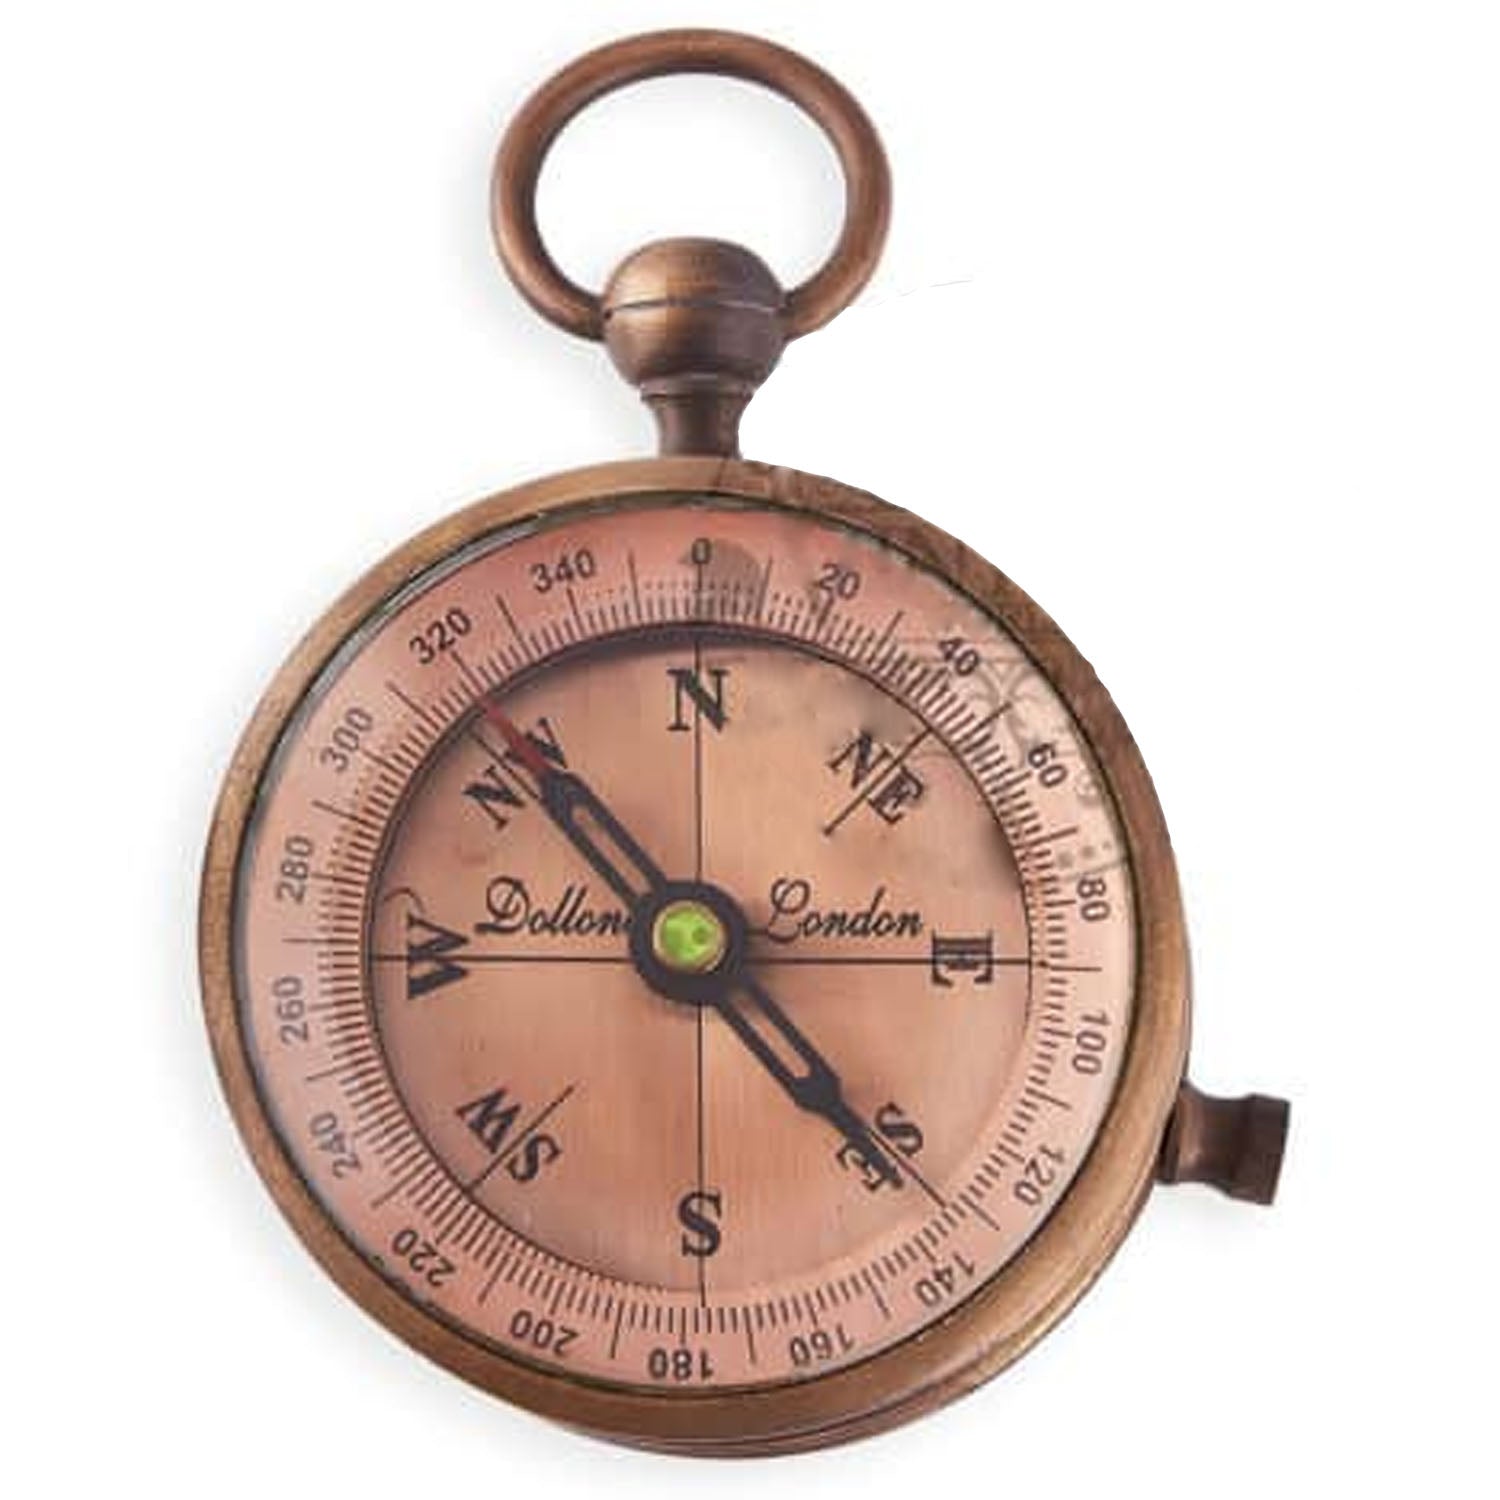 Dollond Copper Dial Pocket Compass - 55mm - Notbrand